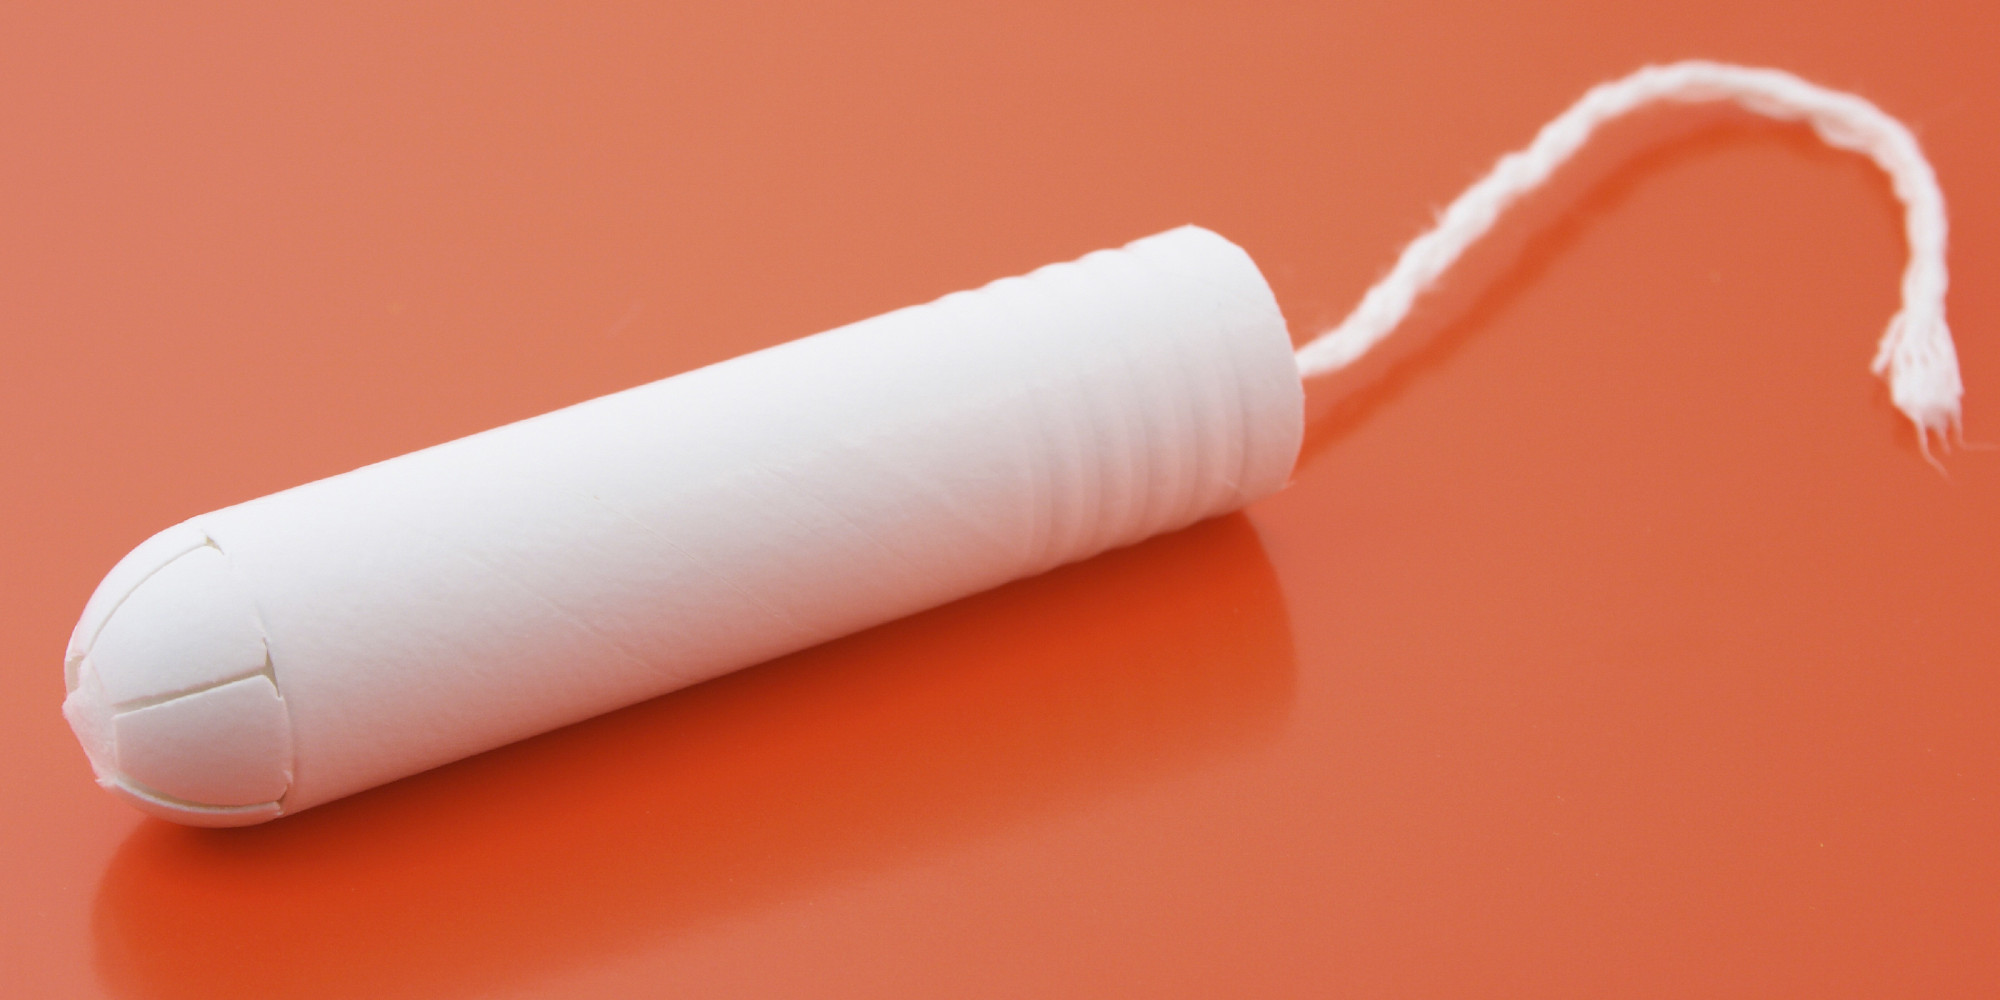 New Tampons Could Protect Women Against Hiv Huffpost